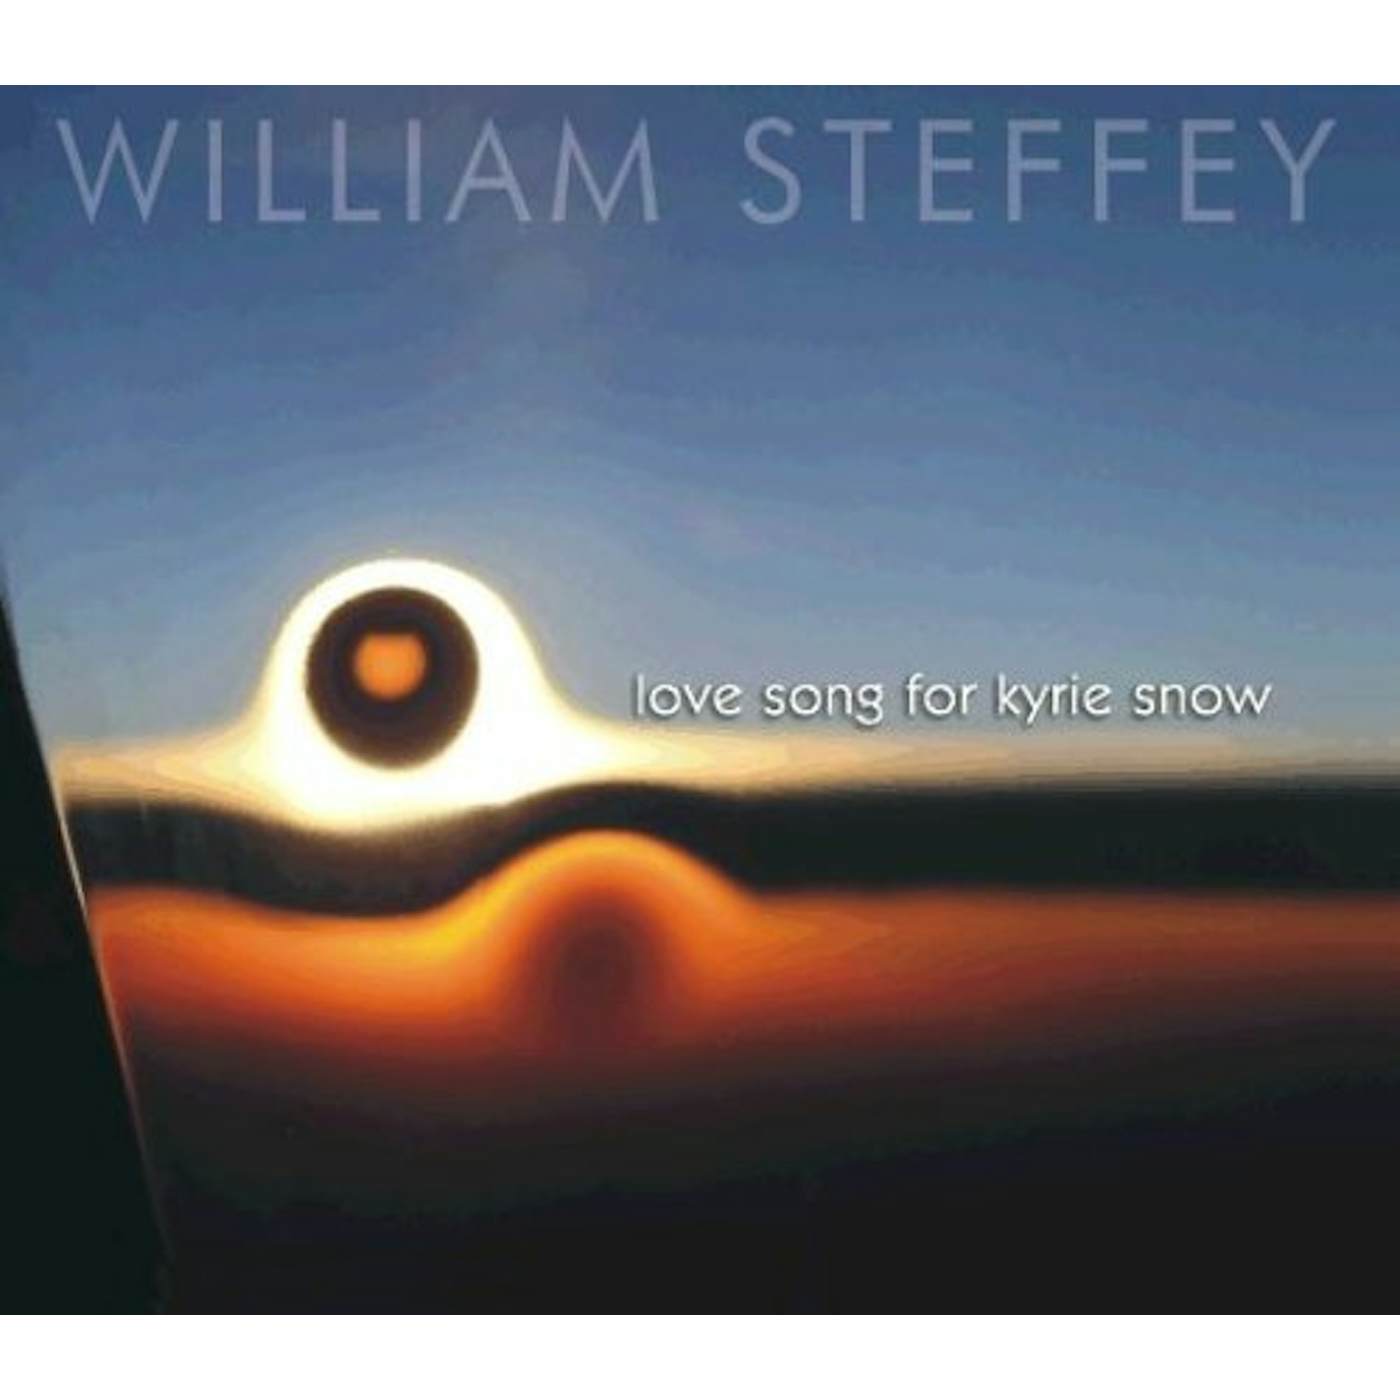 William Steffey LOVE SONG FOR KYRIE SNOW CD